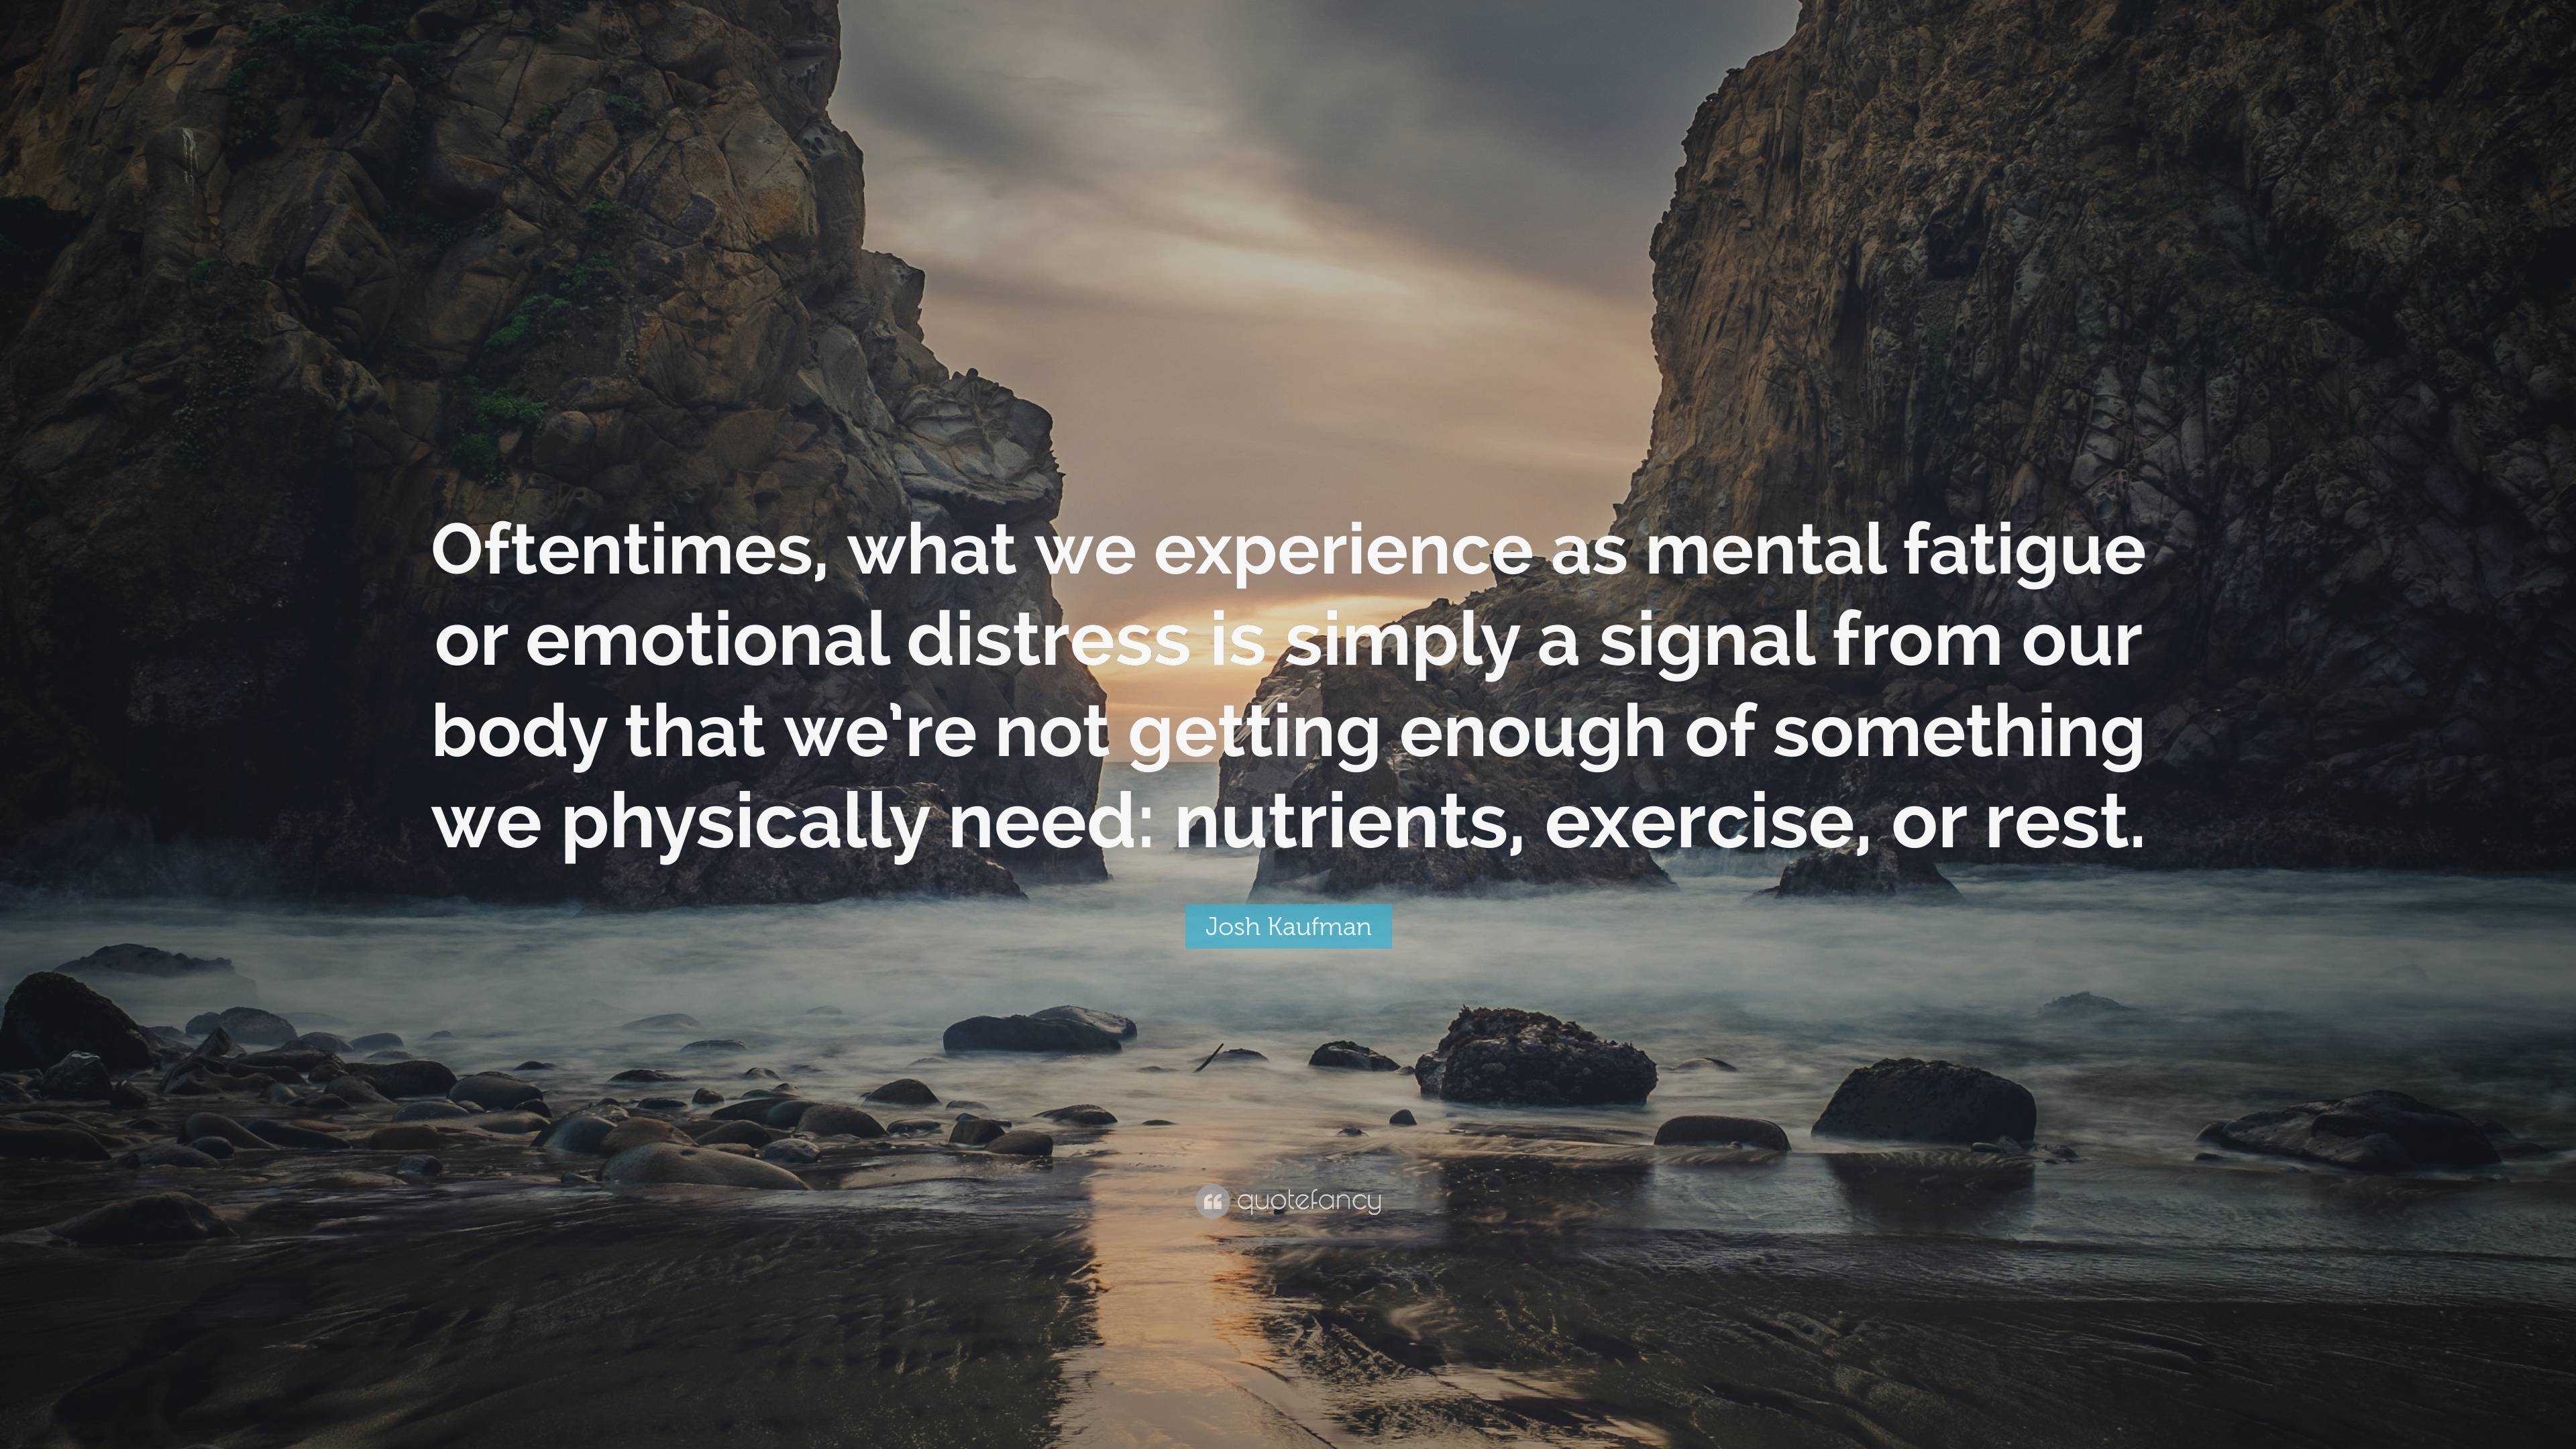 Josh Kaufman Quote: “Oftentimes, what we experience as mental fatigue ...